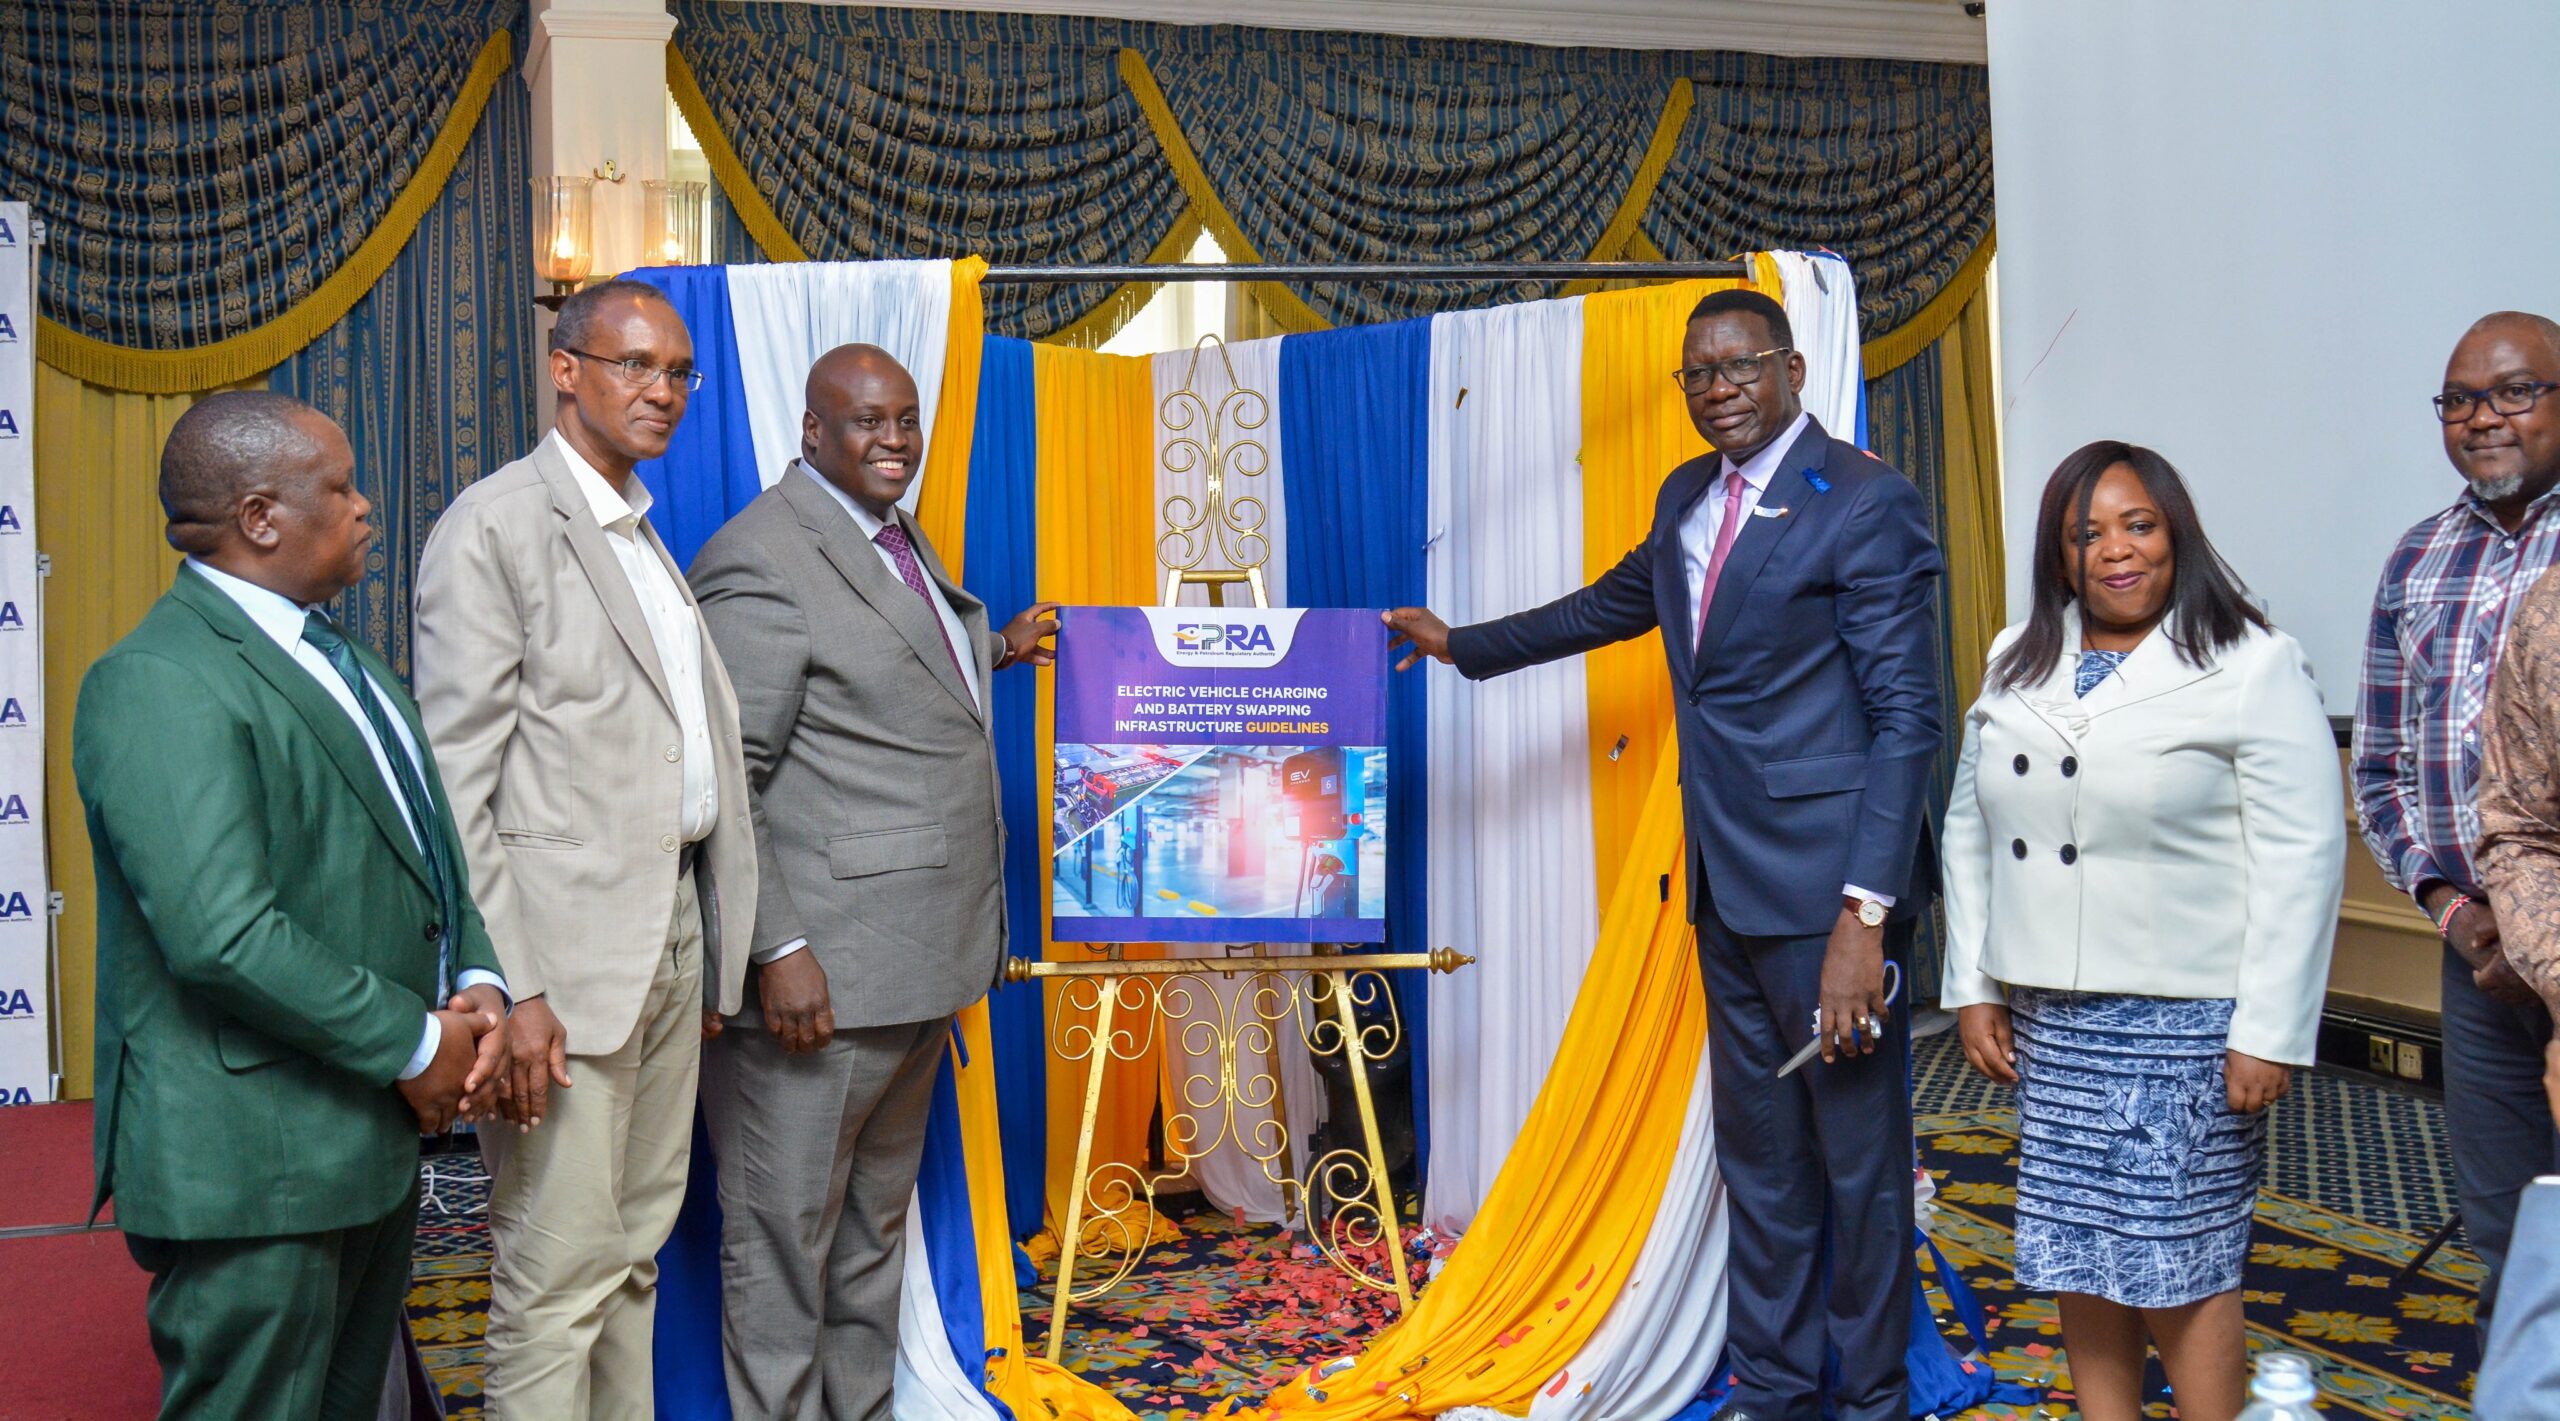 Energy Cabinet Secretary Davis Chirchir (third from right) and EPRA Director General Daniel Kiptoo (third from left) join other leaders in unveilling the